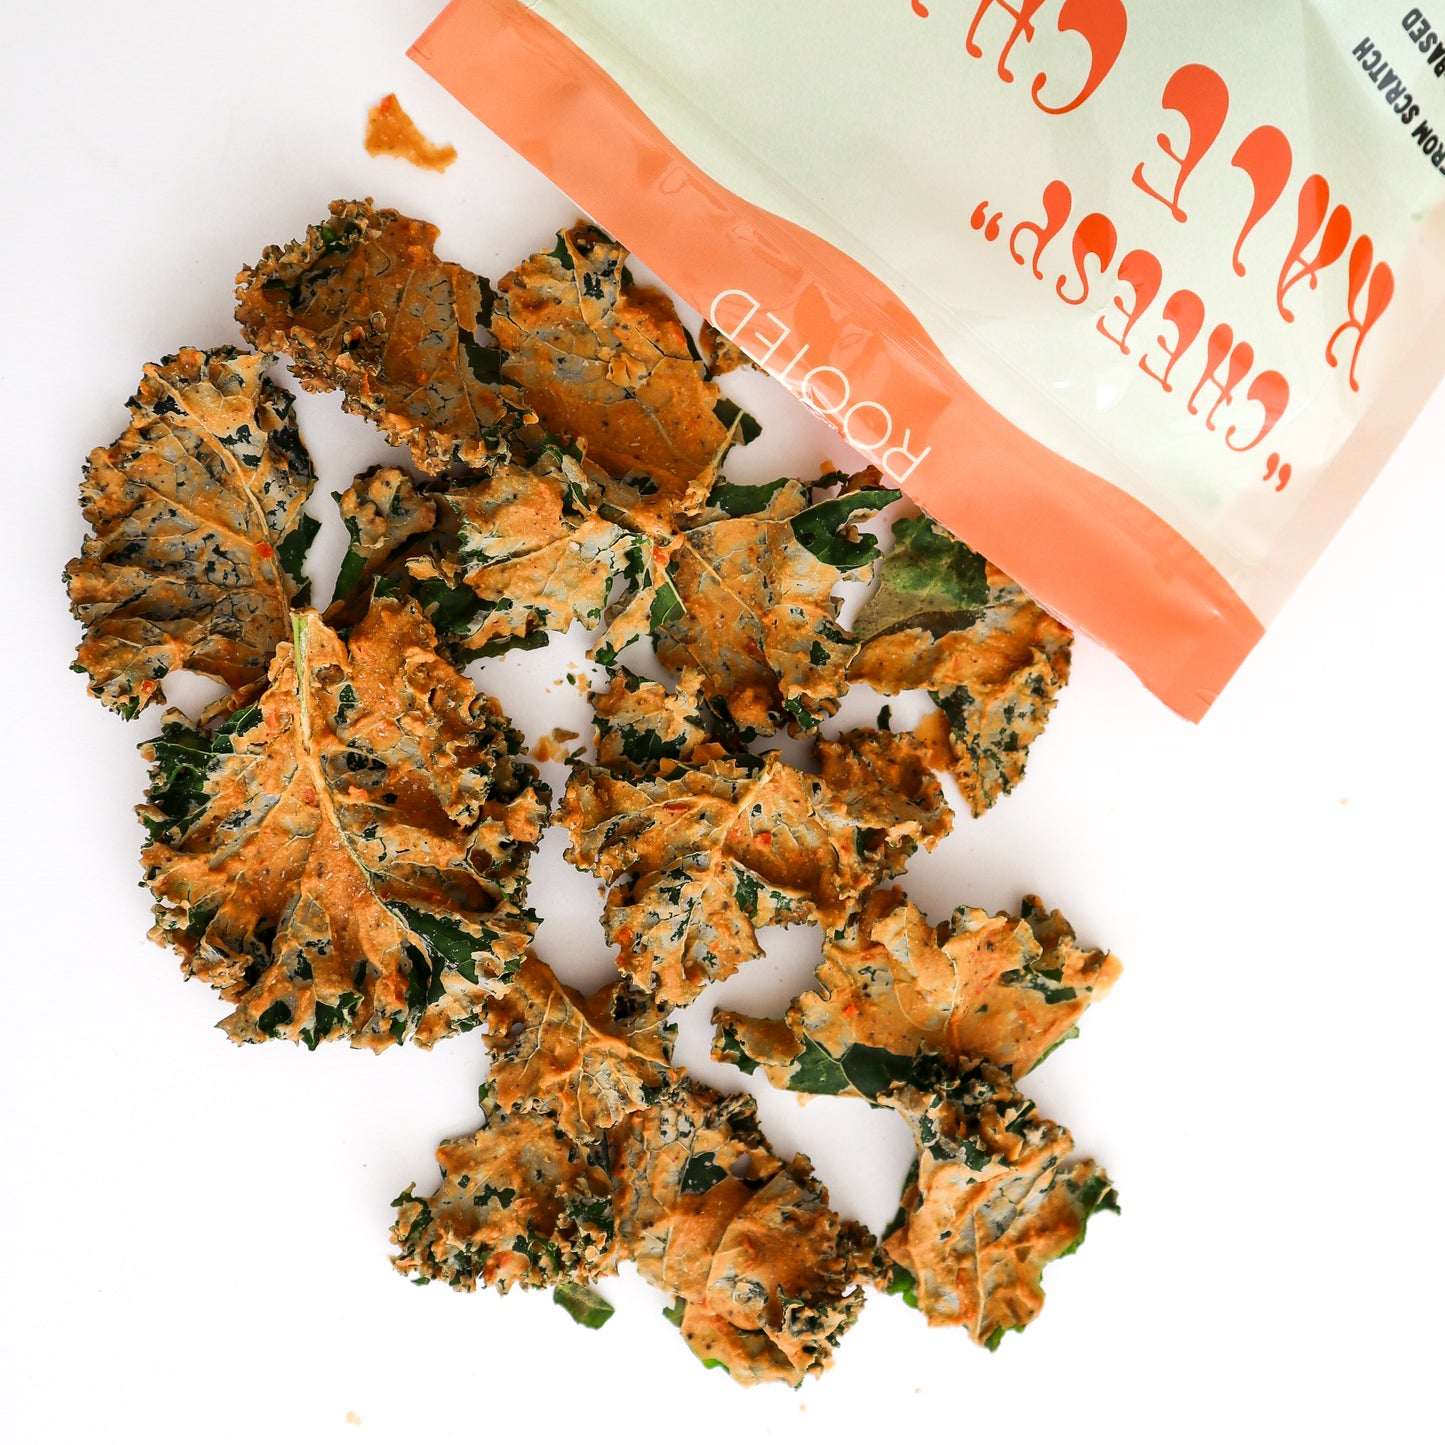 "Cheesy" Kale Chips